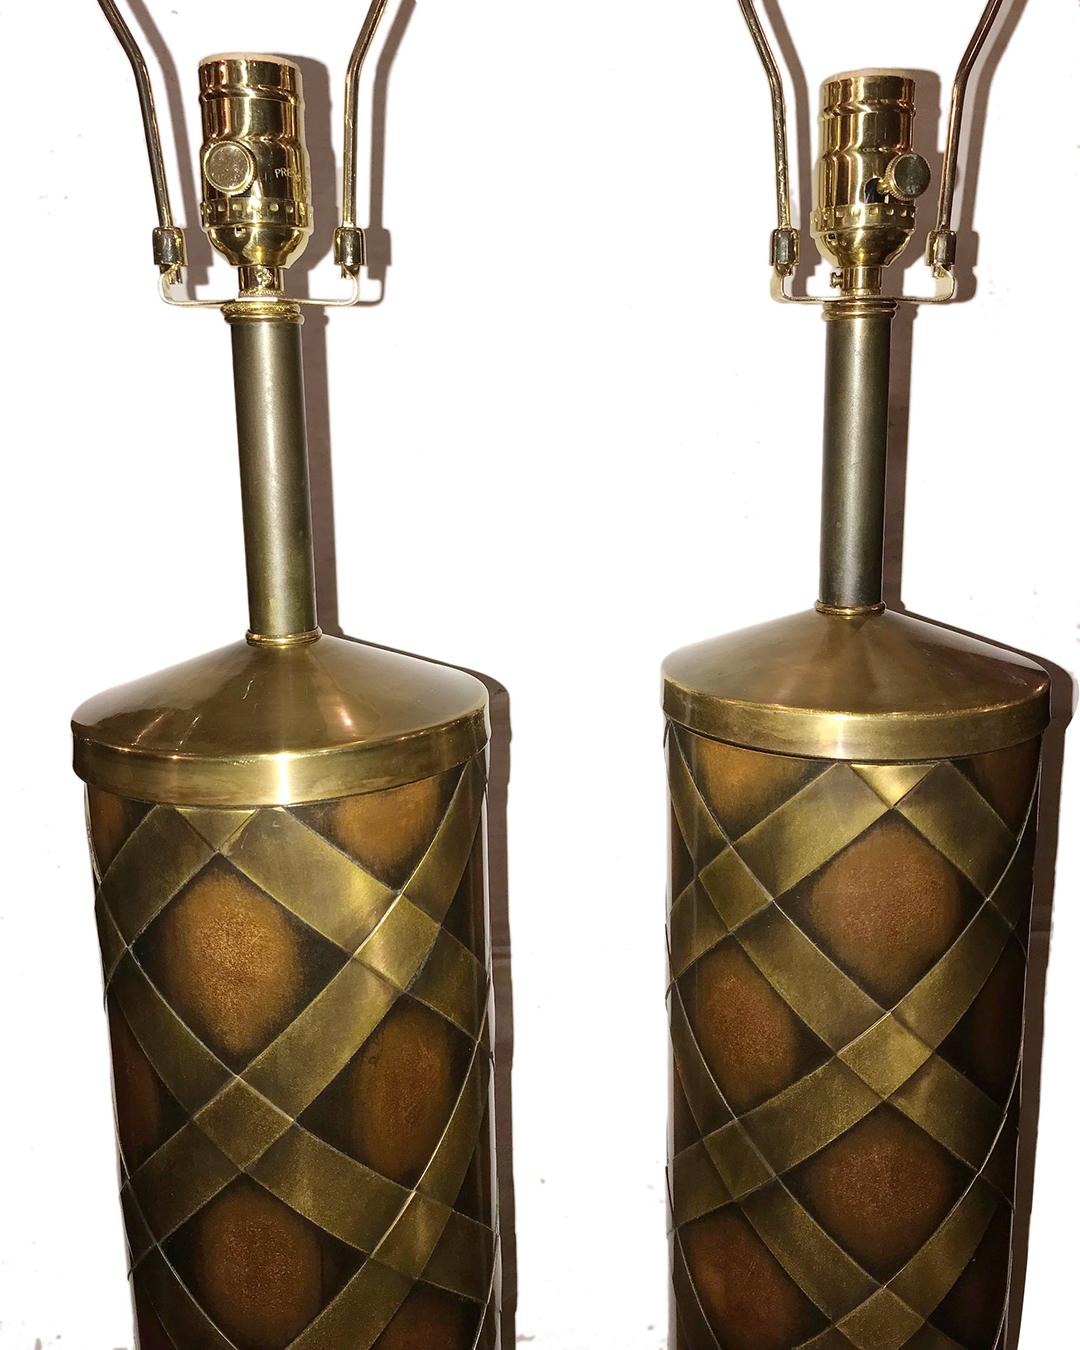 A pair of circa 1950s Italian copper table lamps with brass details on body. 

Measurements:
Height of body: 23